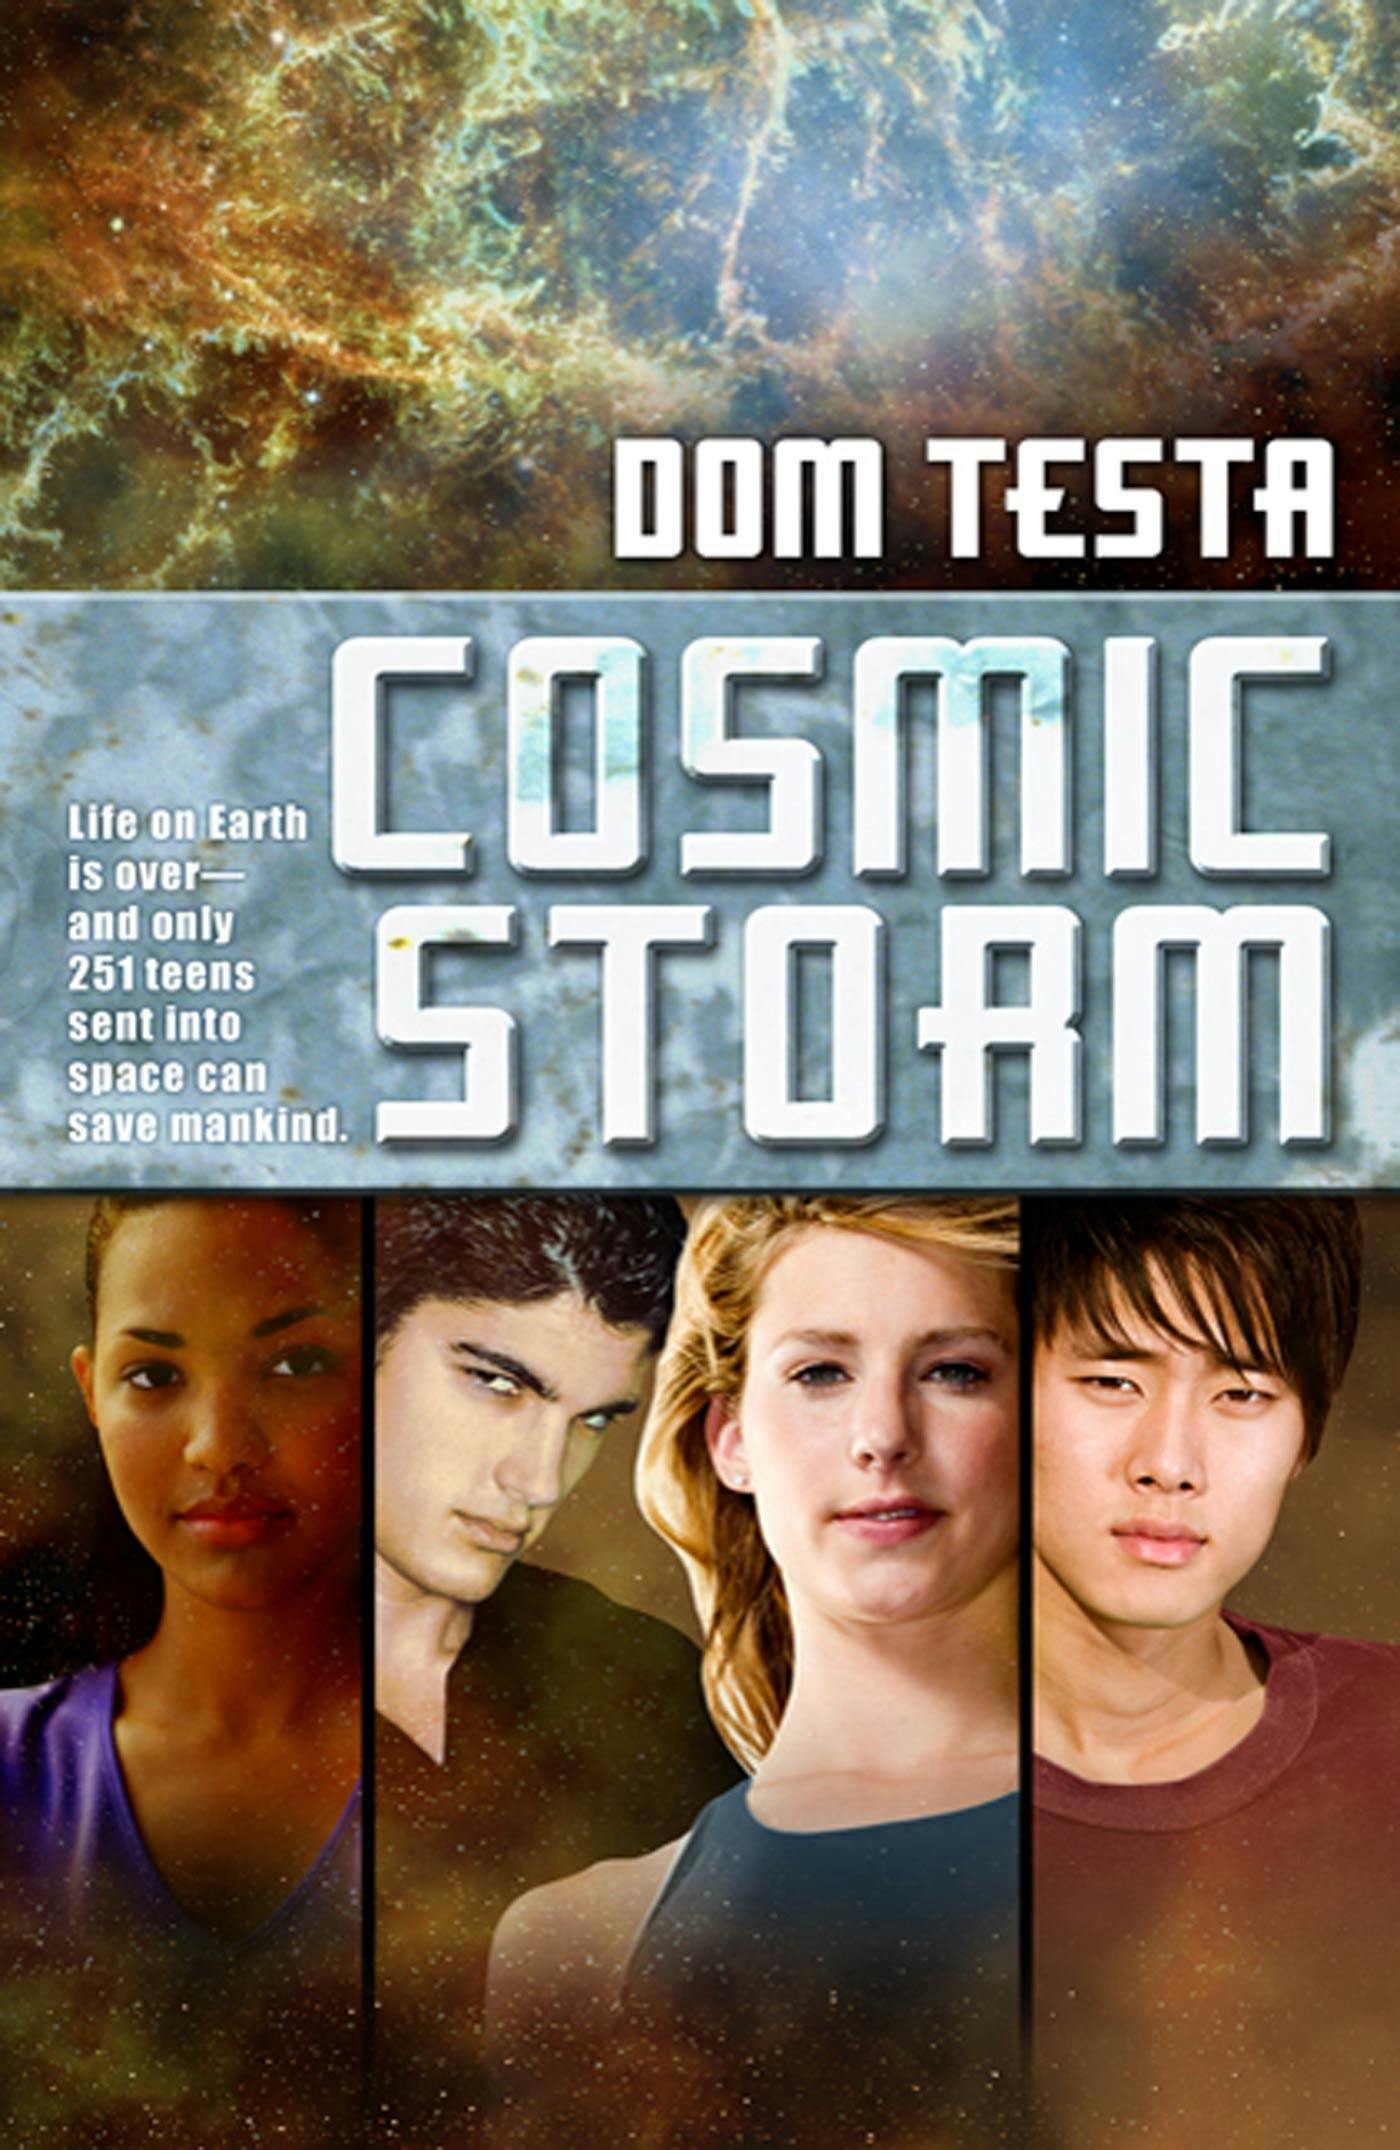 Cover for the book titled as: Cosmic Storm